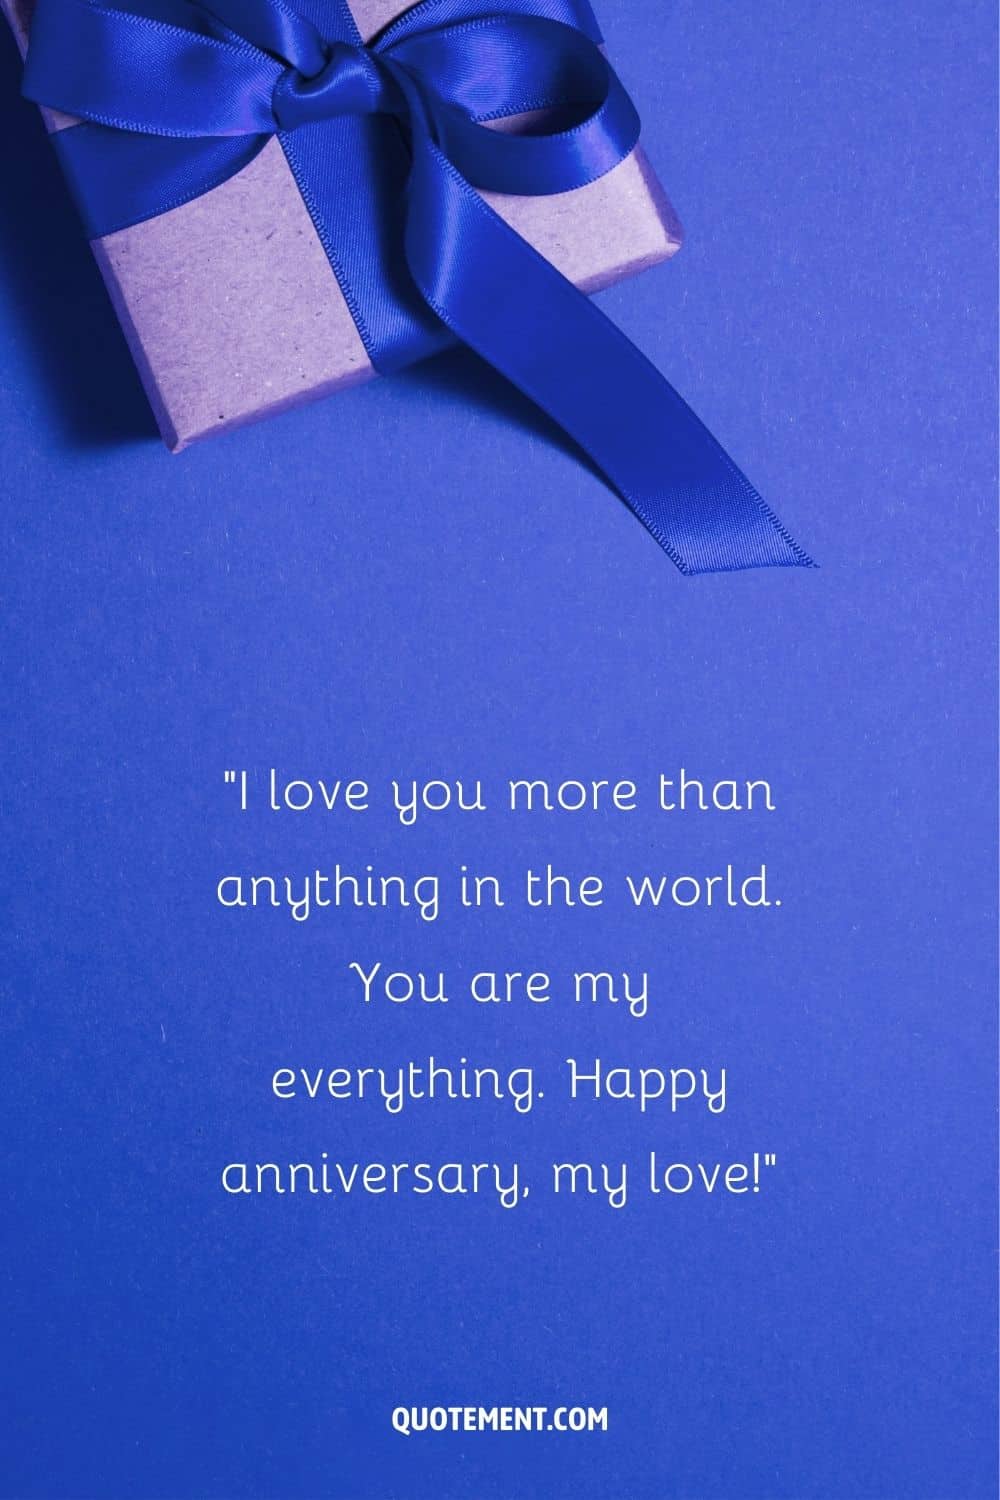 You are my everything. Happy anniversary, my love!